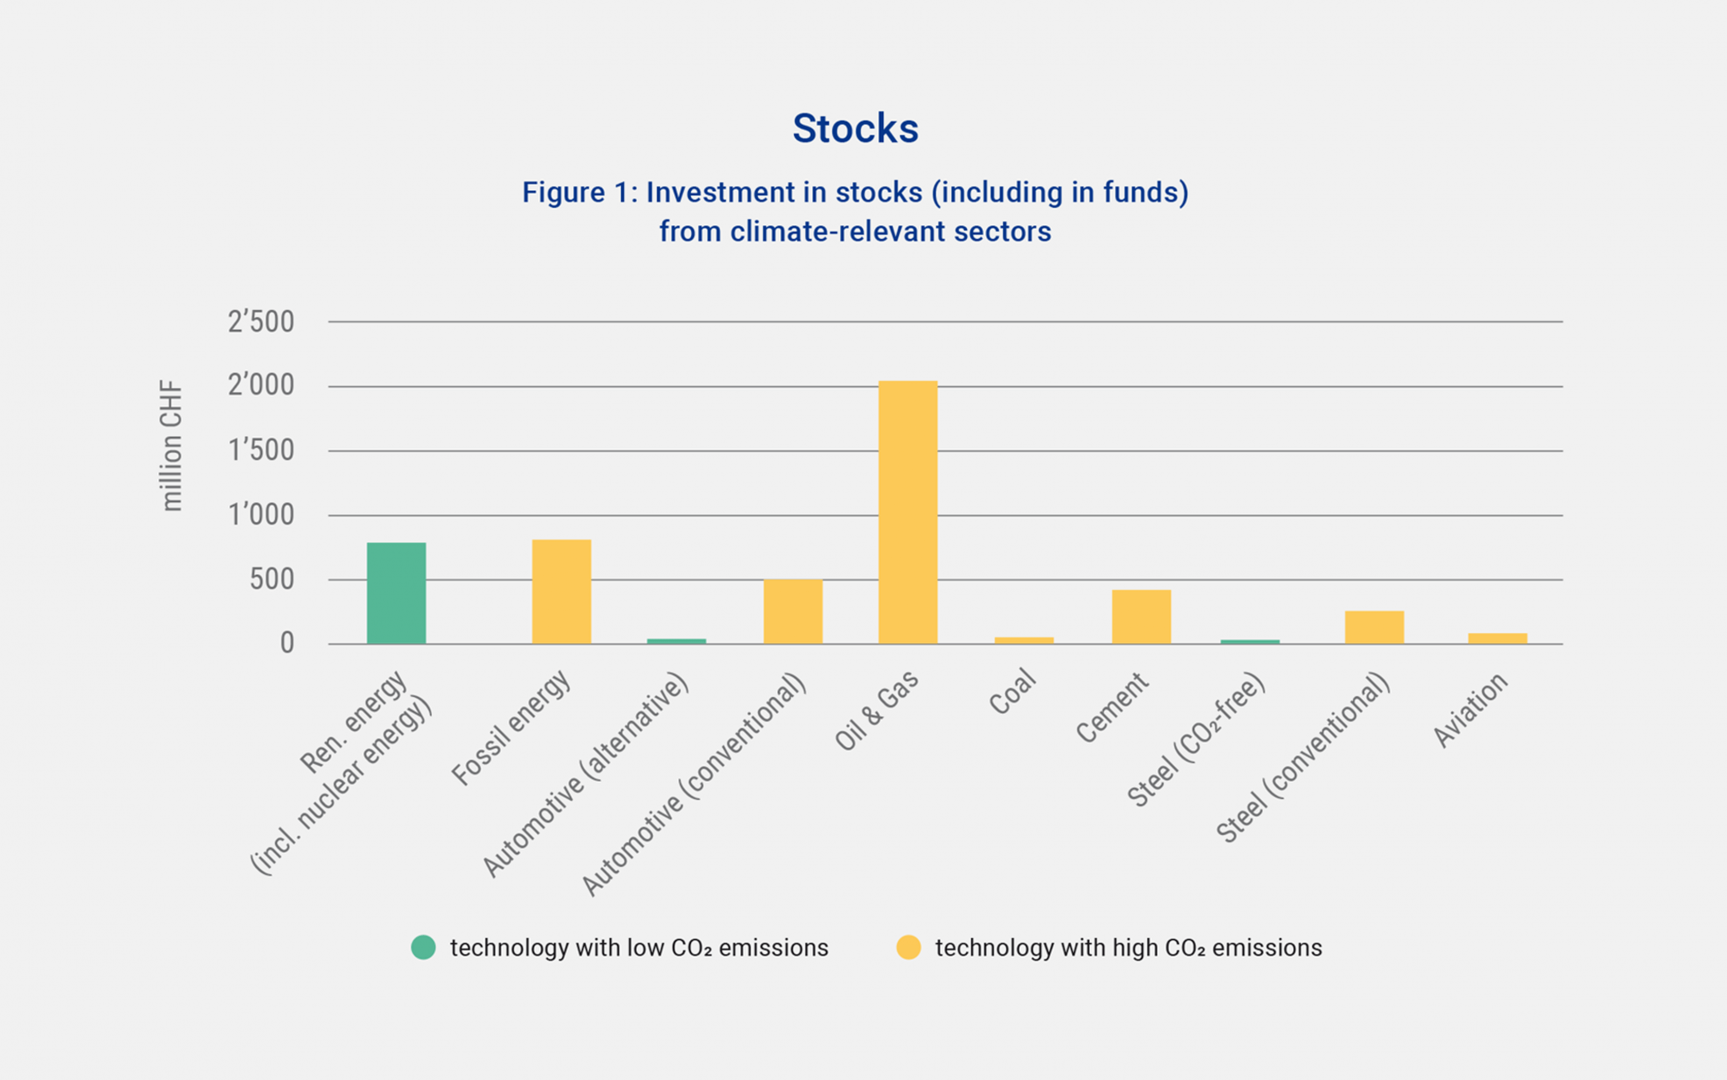 Investment in stocks from climate-relevant sectors